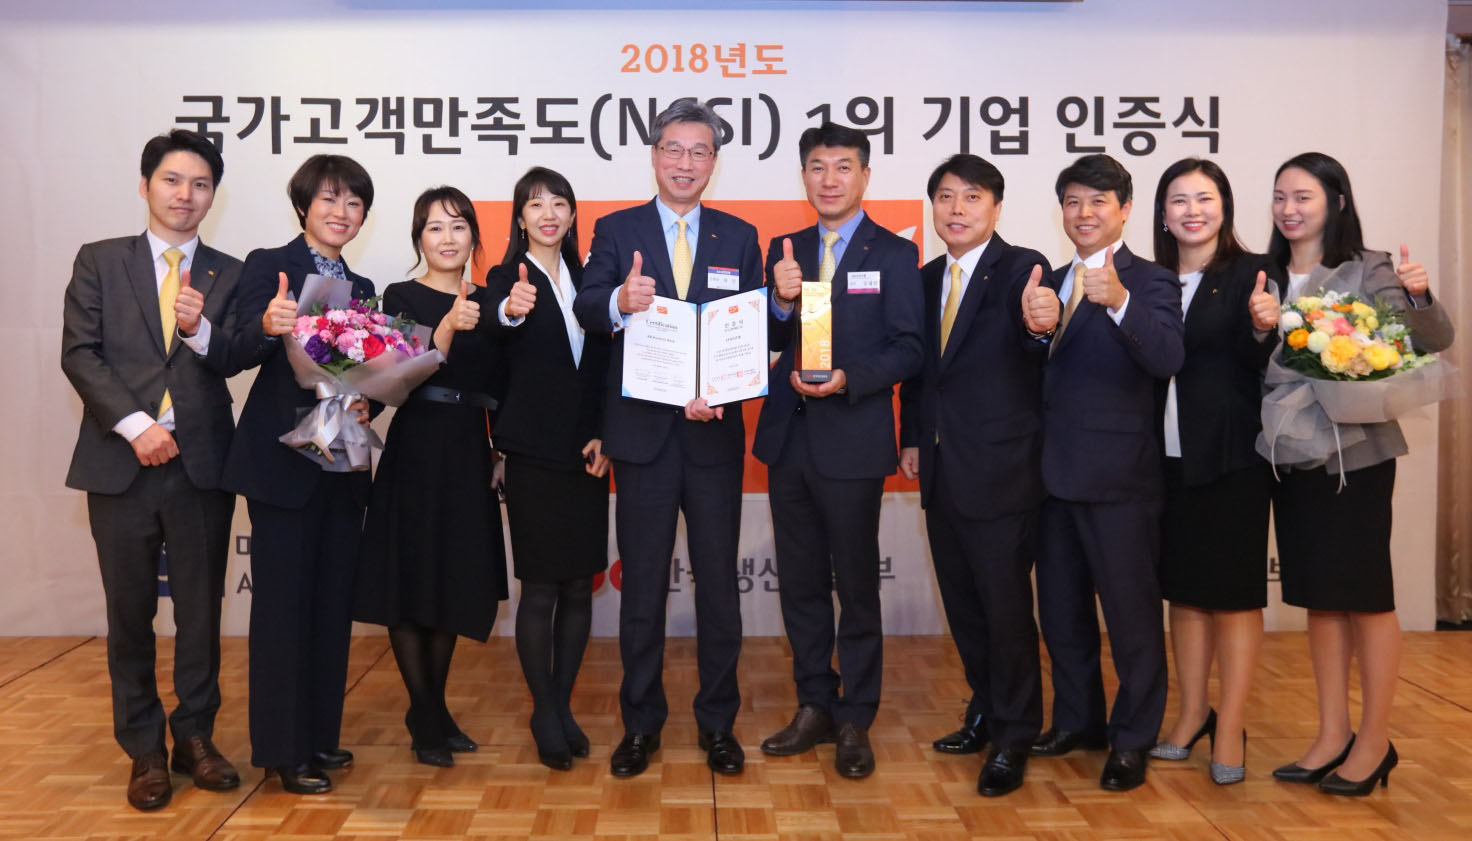 Ranked No. 1 in the NCSI by the Korea Productivity Organization (12 times in total)